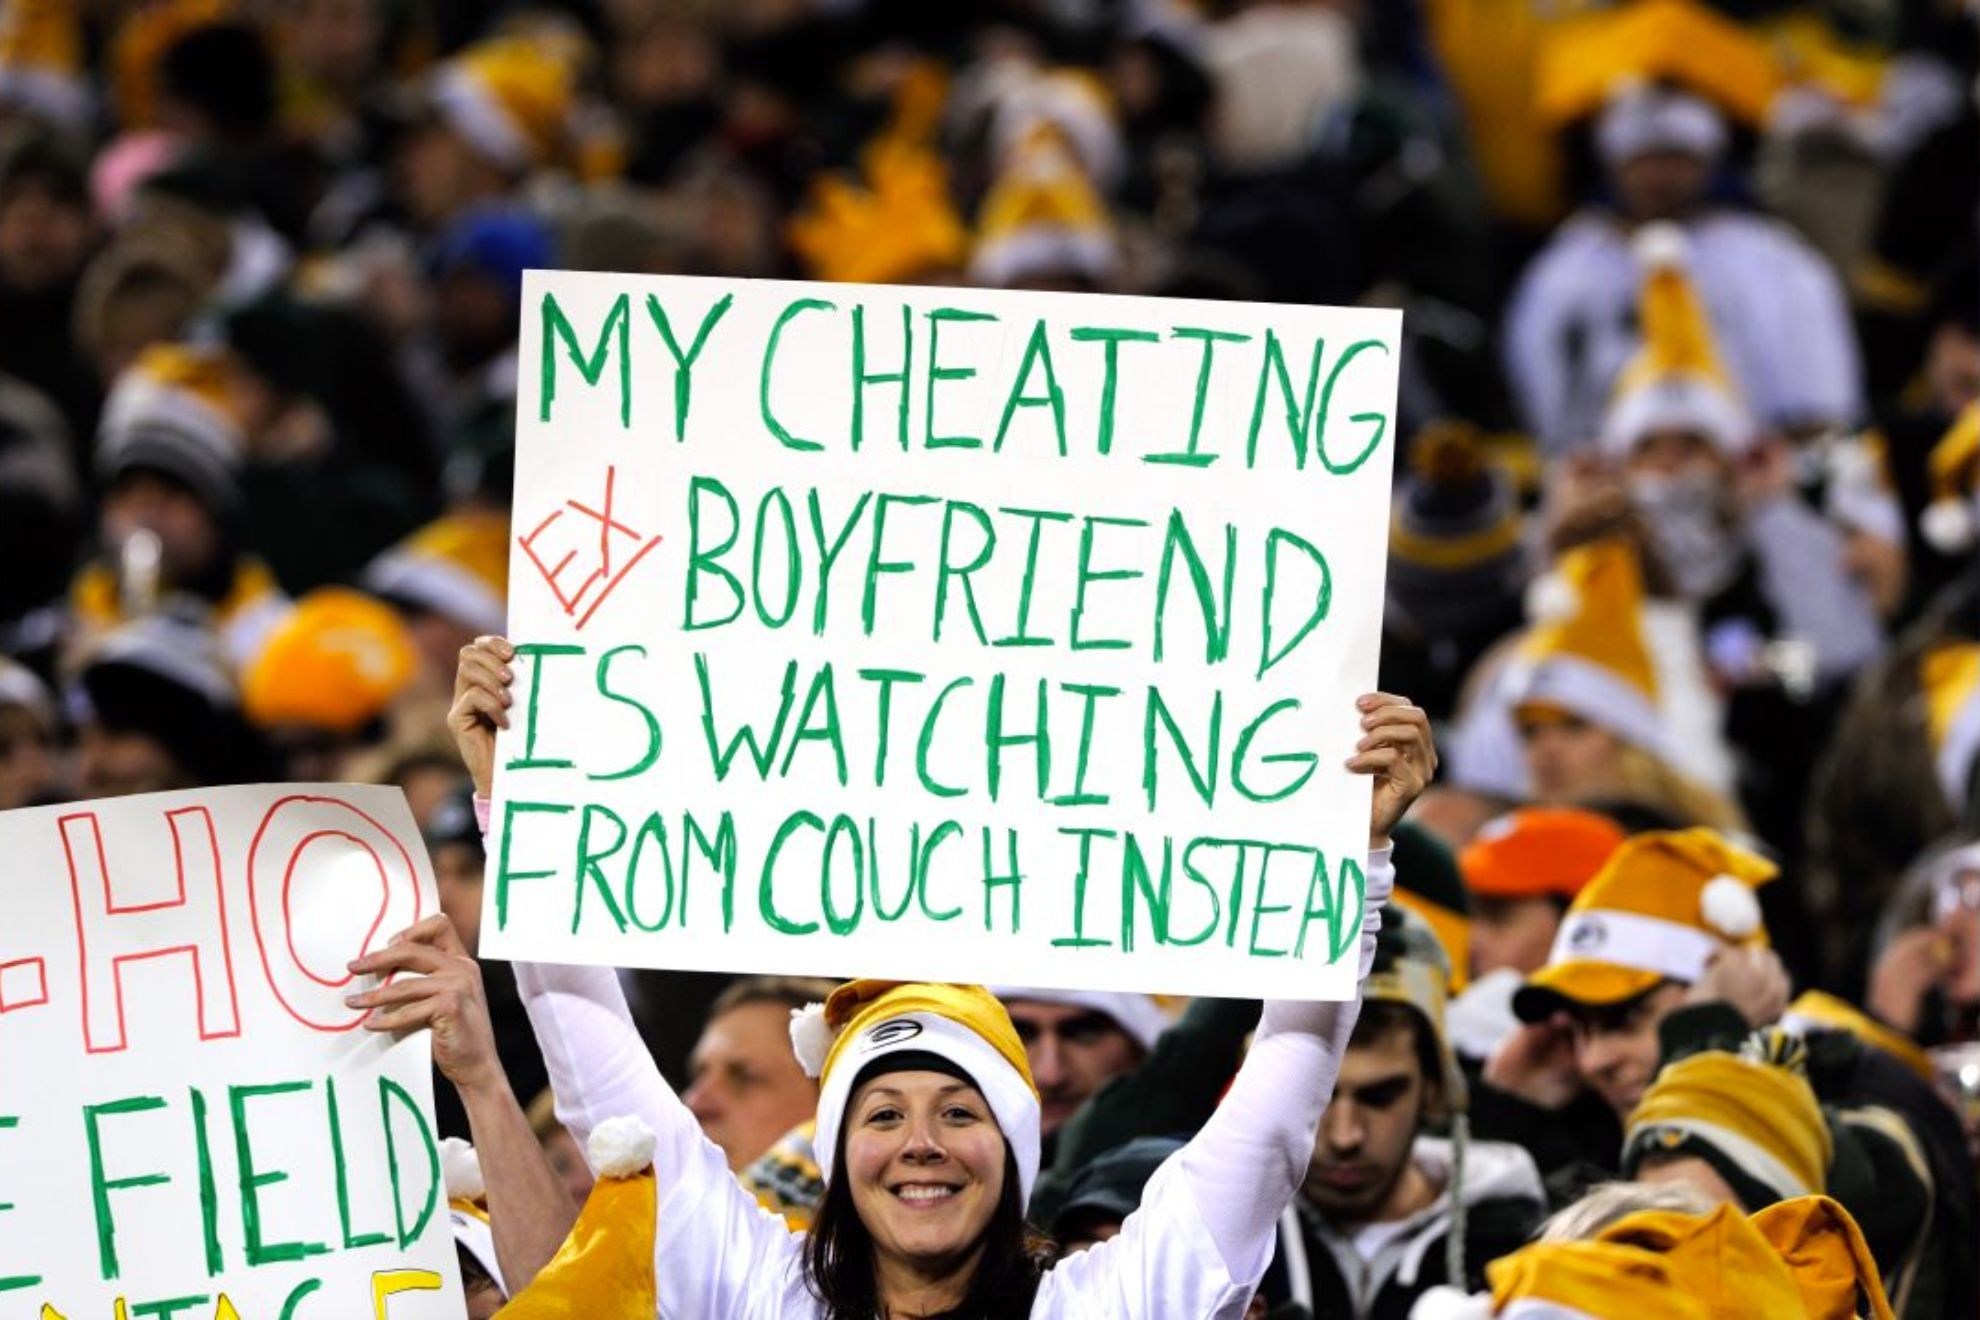 Fan holds sign at a Packers game, getting back at hey ex boyfriend. -AP